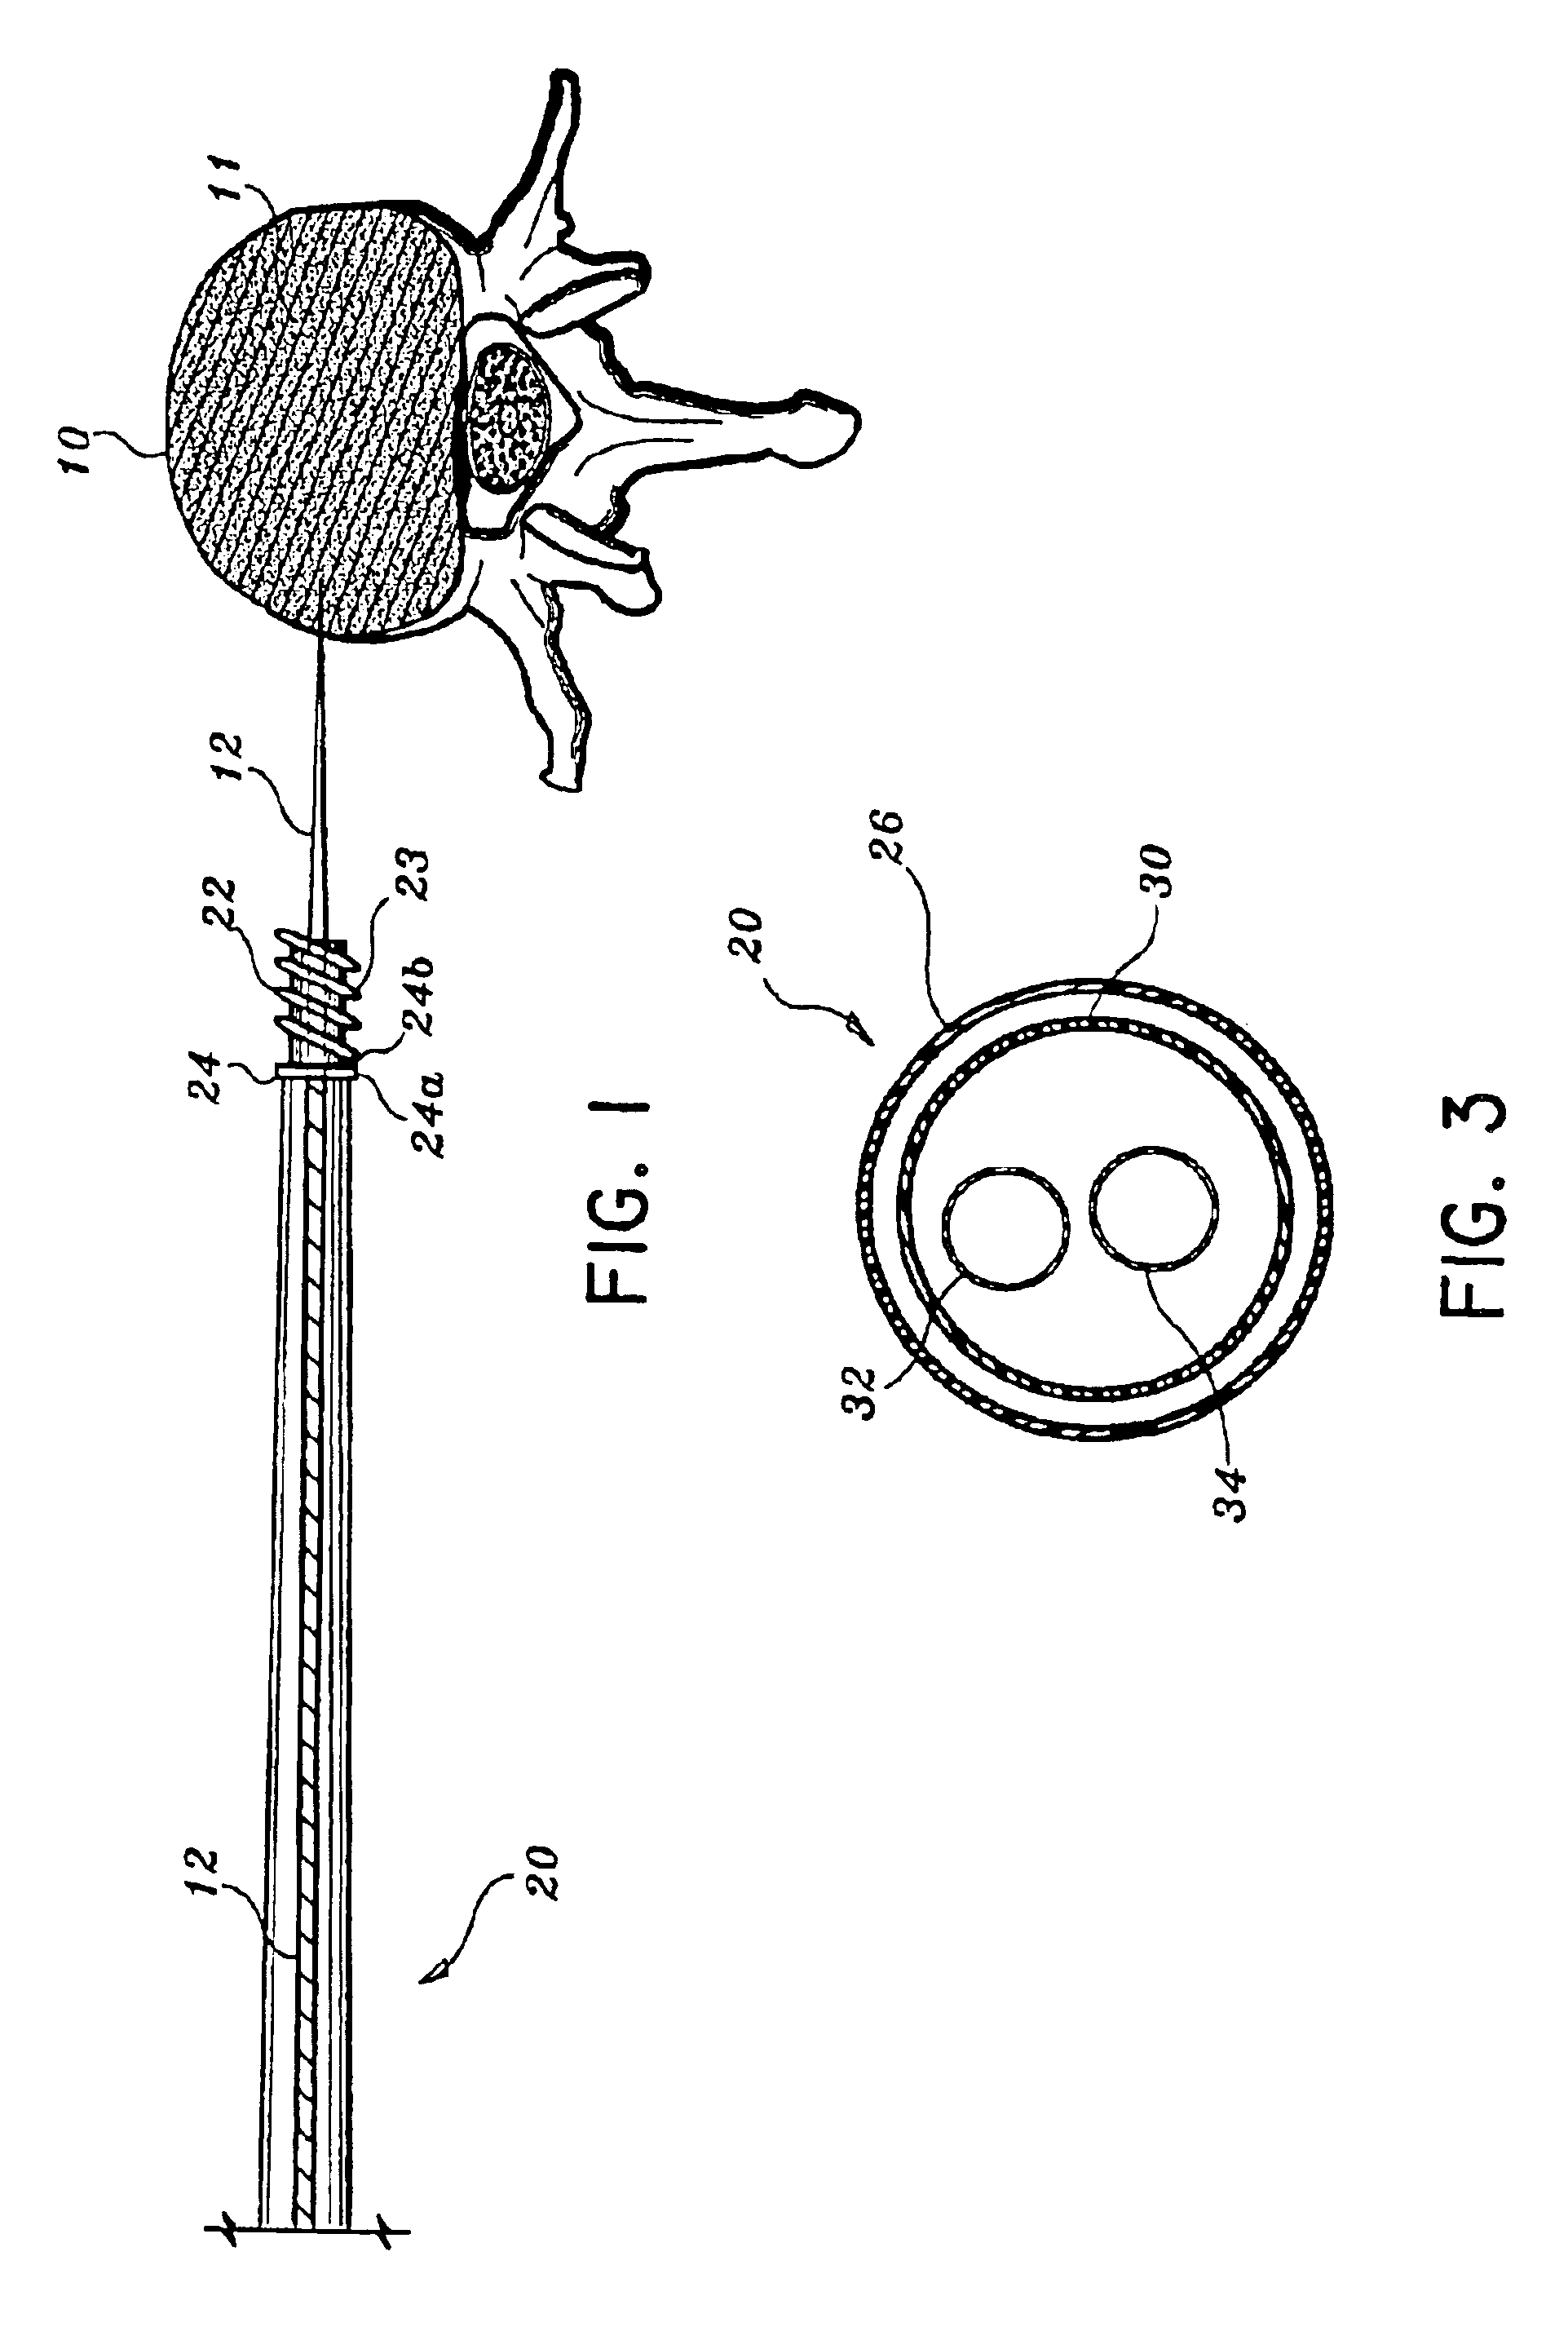 Interbody device and method for treatment of osteoporotic vertebral collapse